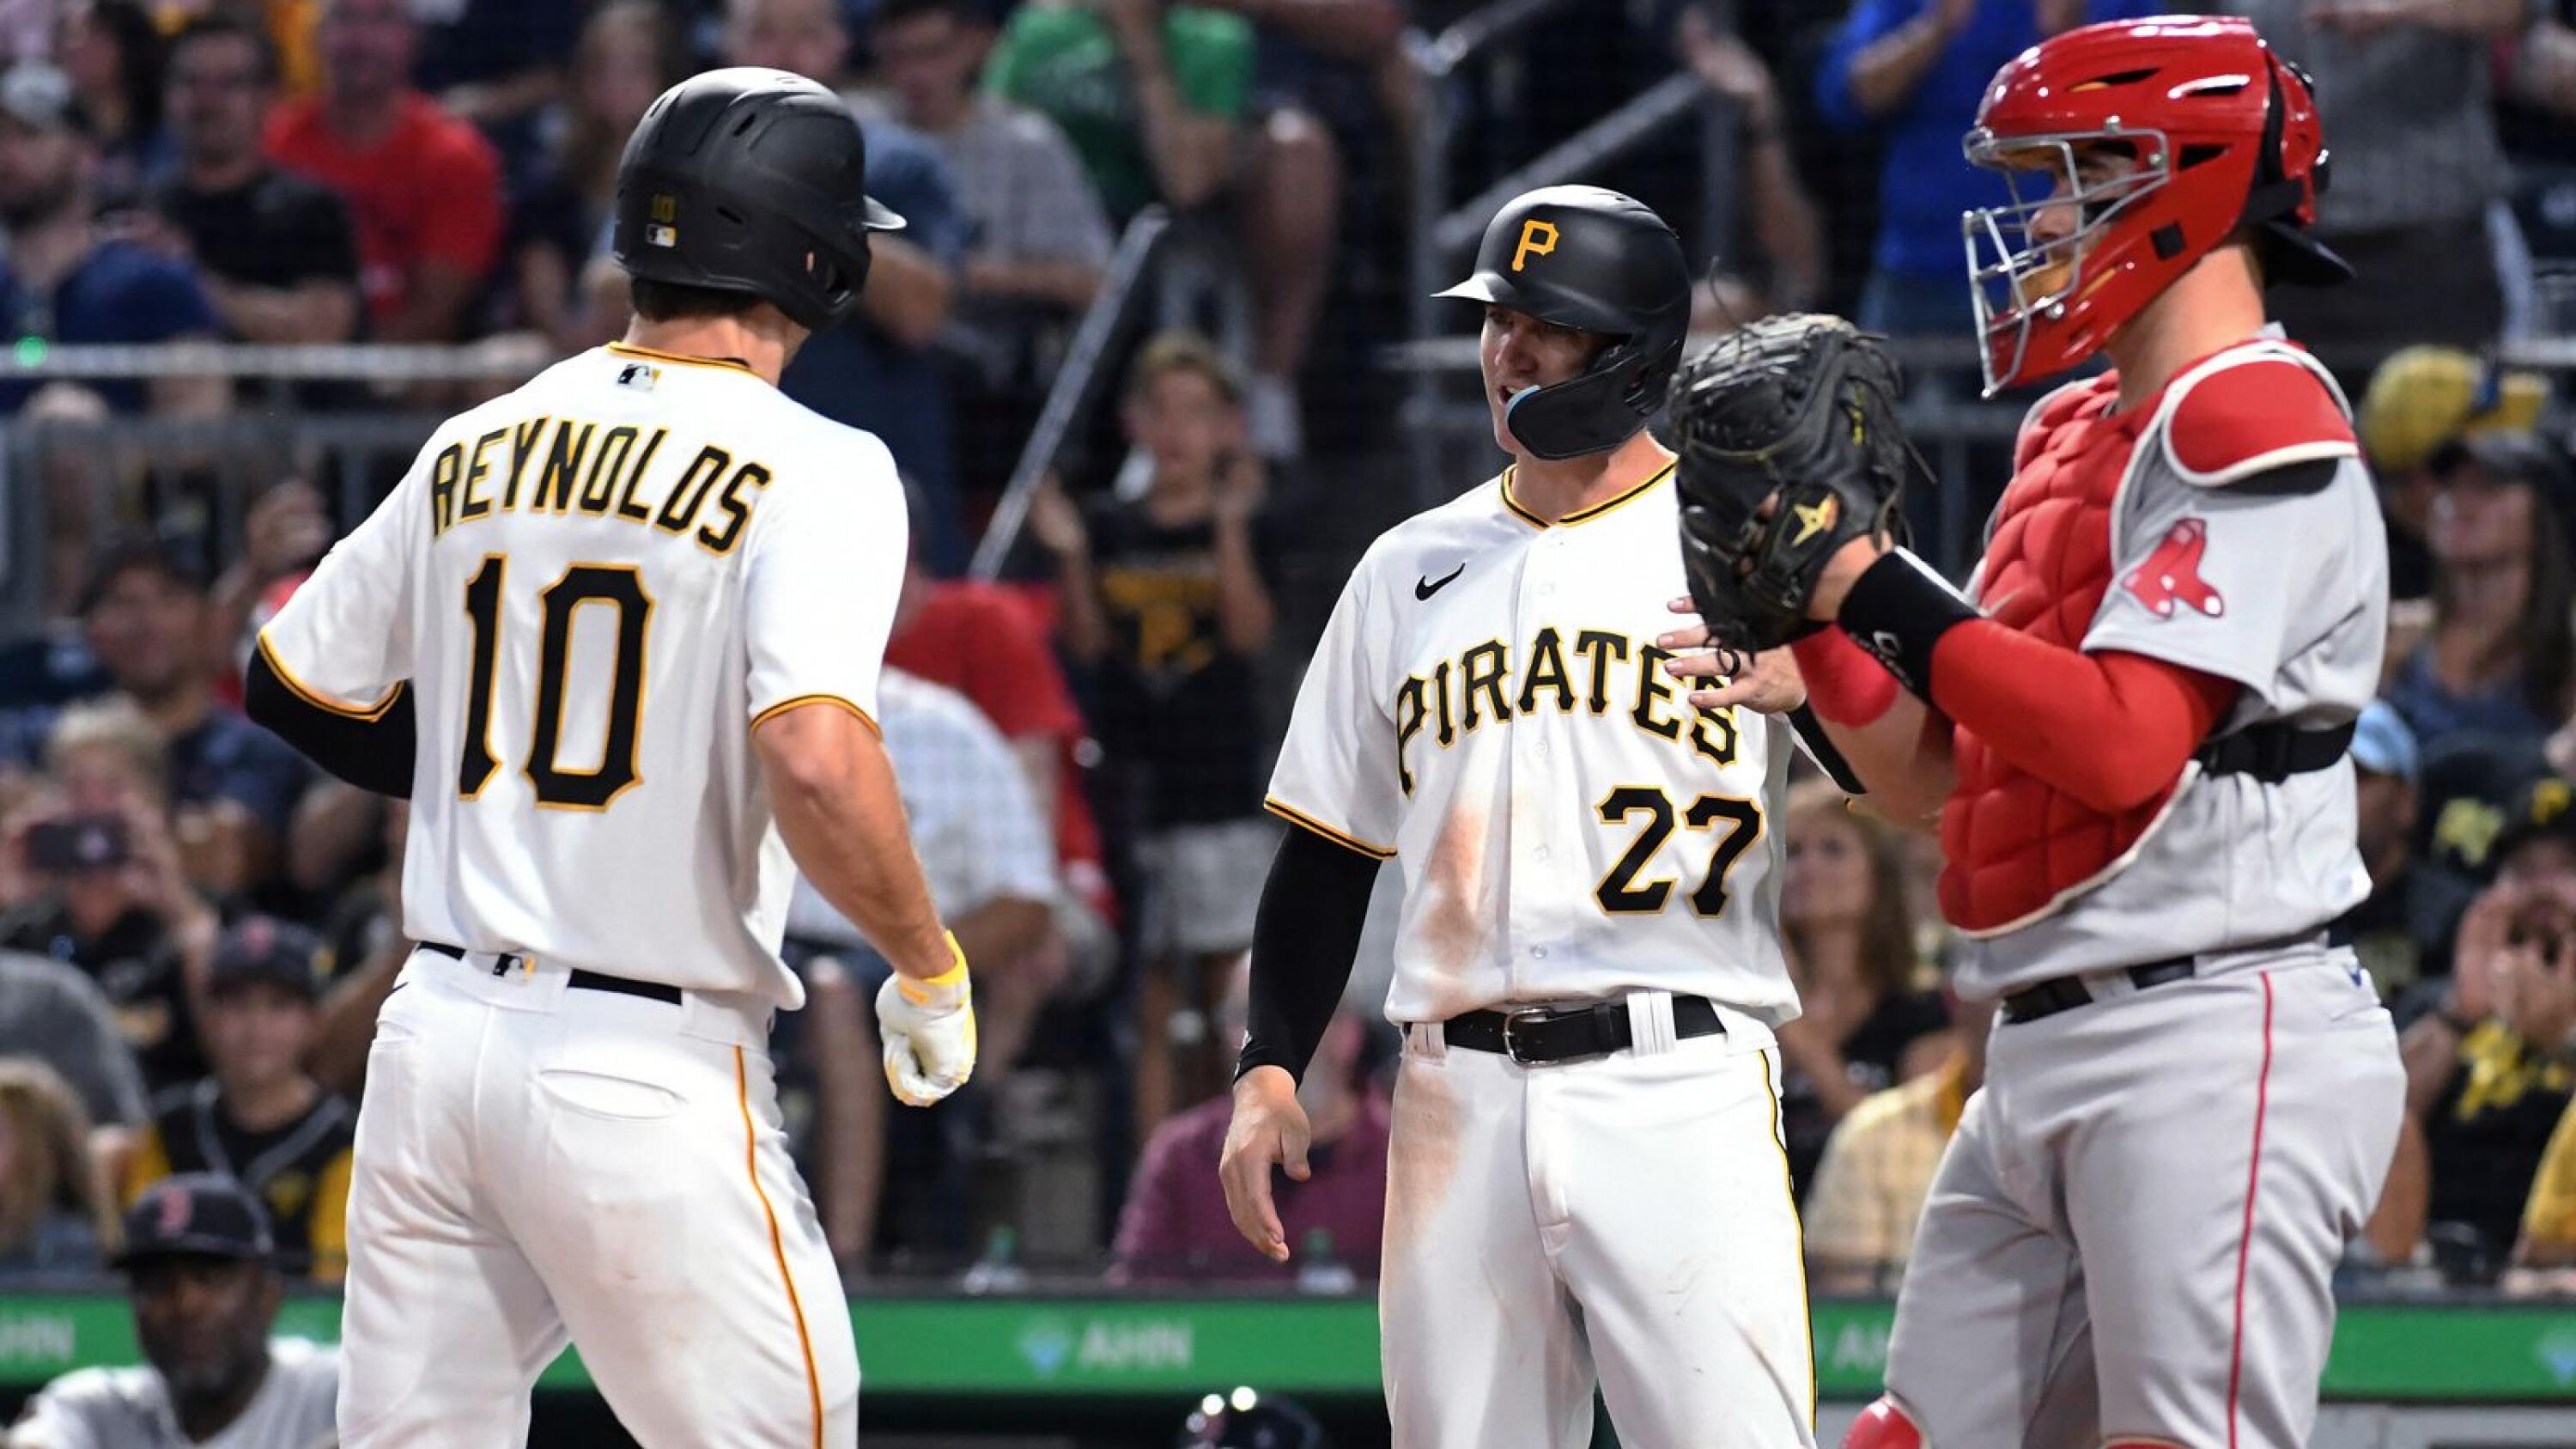 Reynolds homers twice as Pirates toppled Sox 8-2